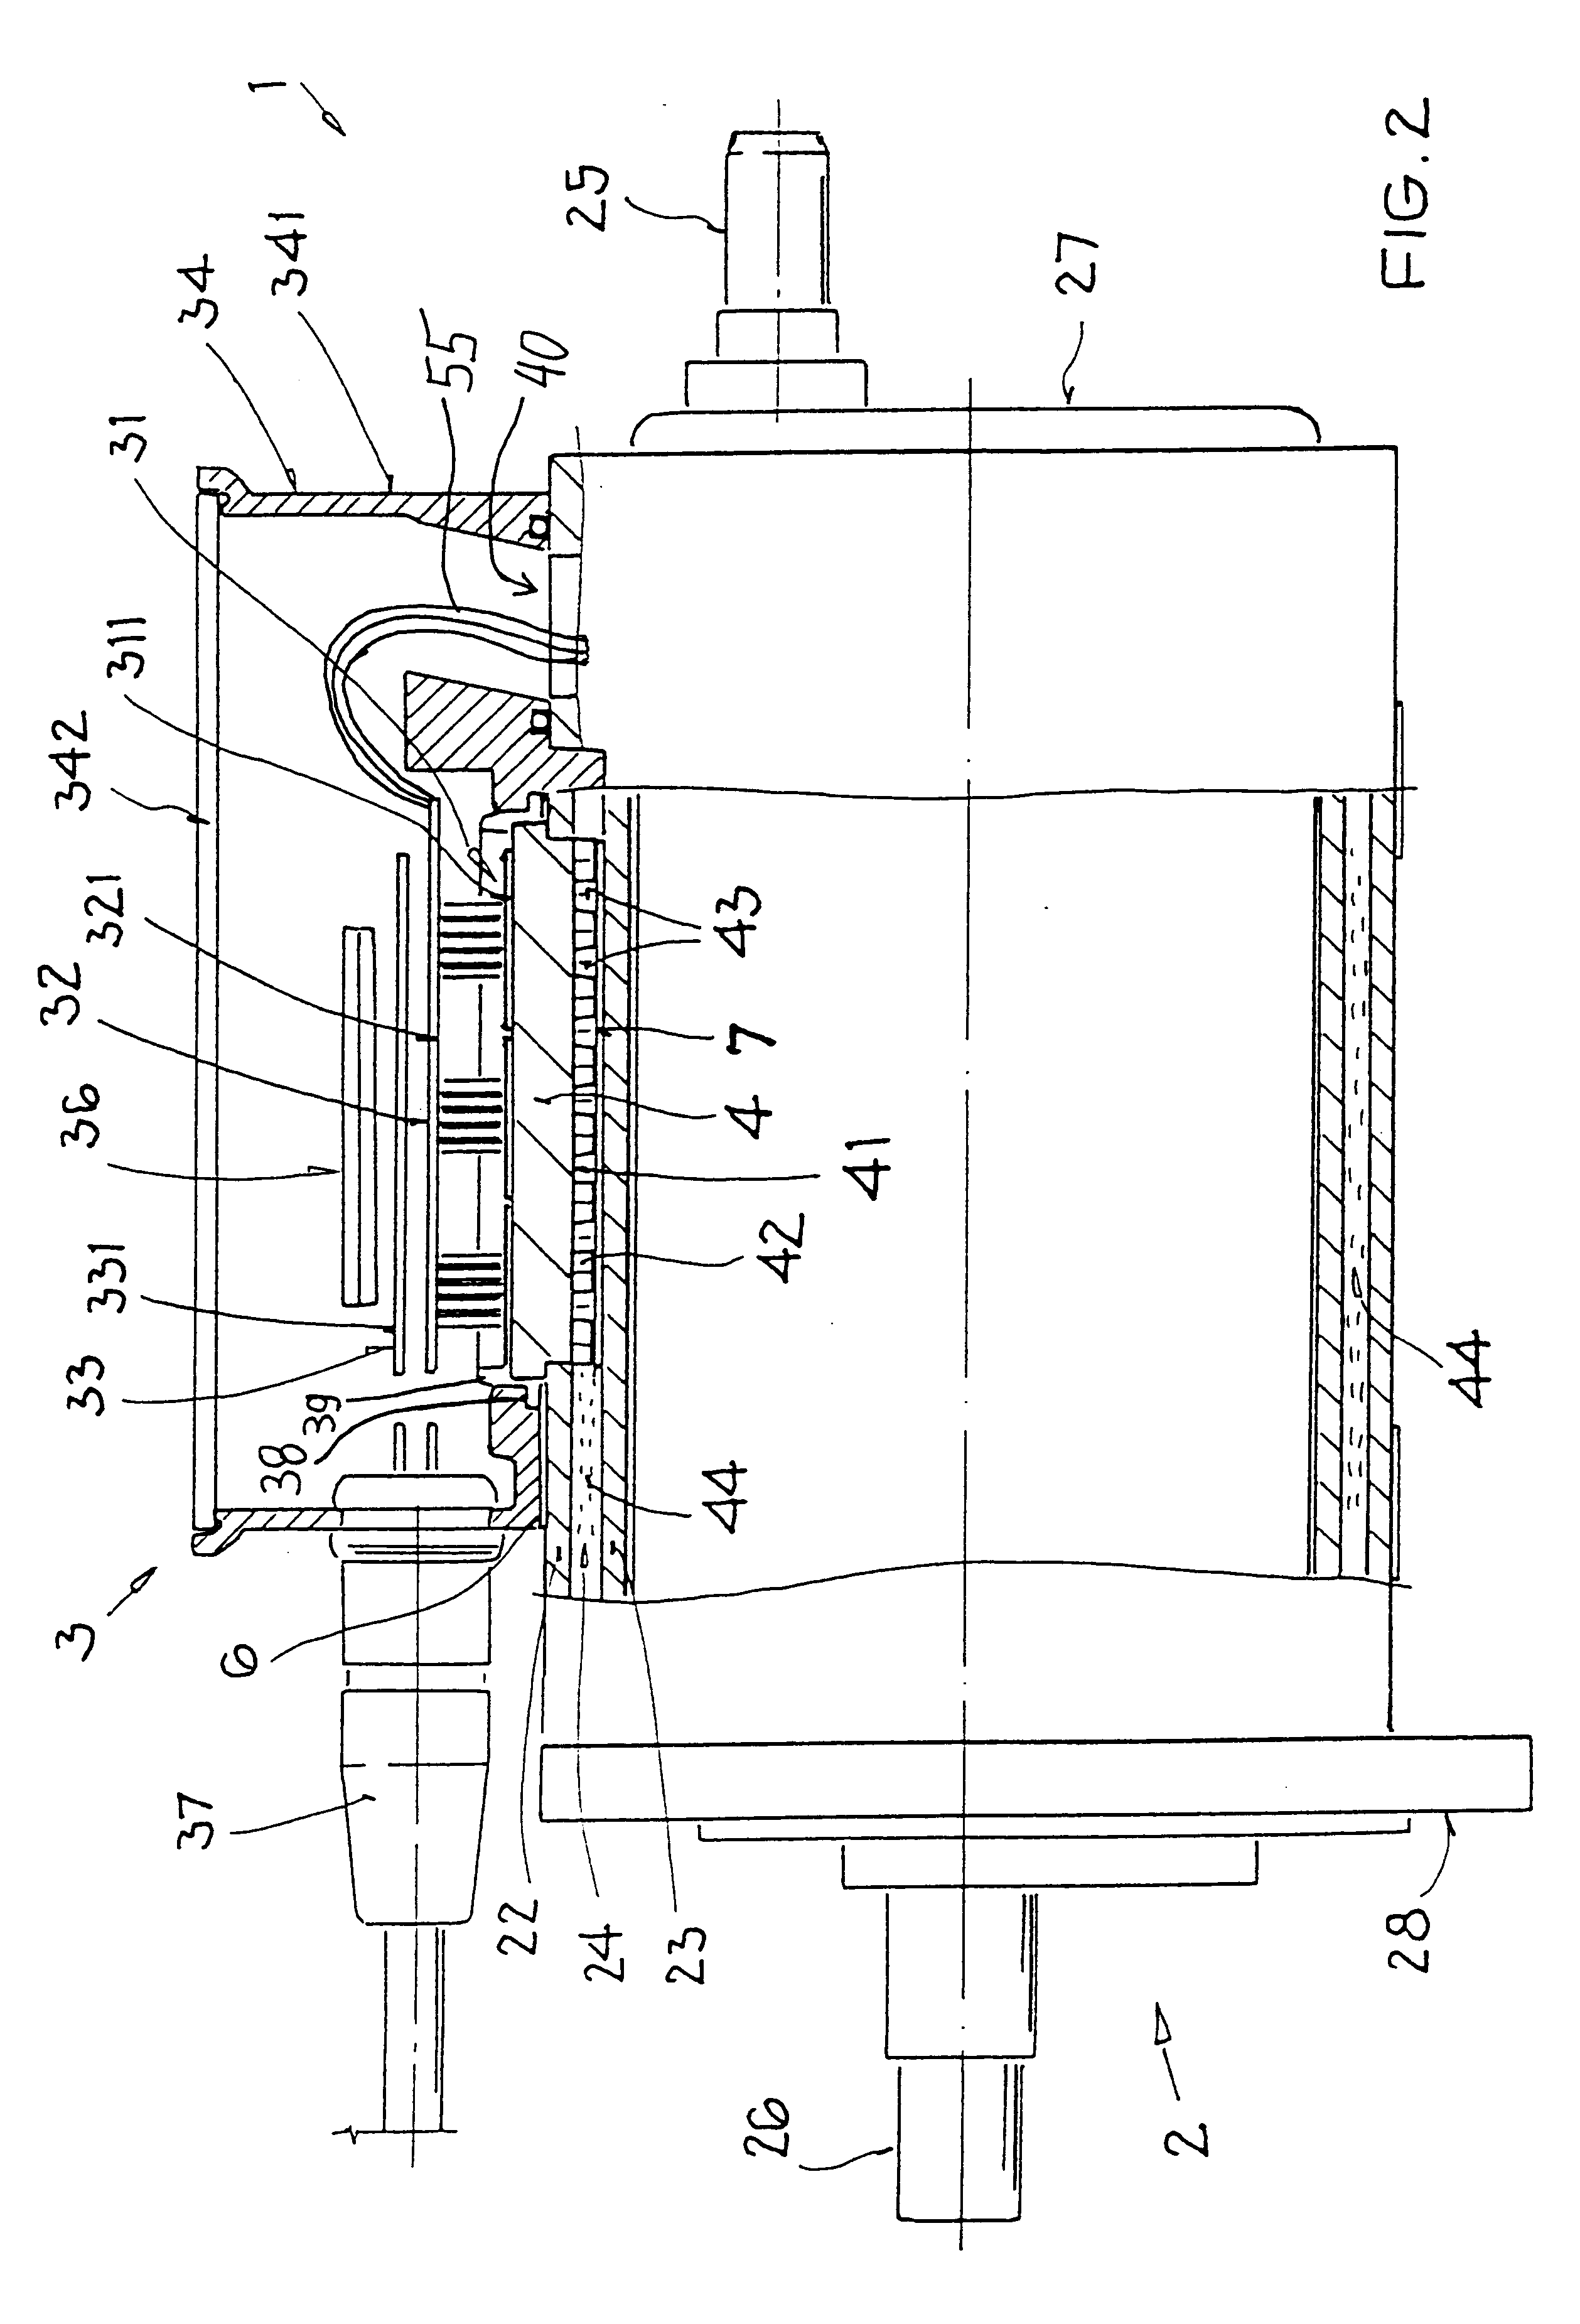 Integrated electric drive unit including an electric motor and an electronic control and monitoring module